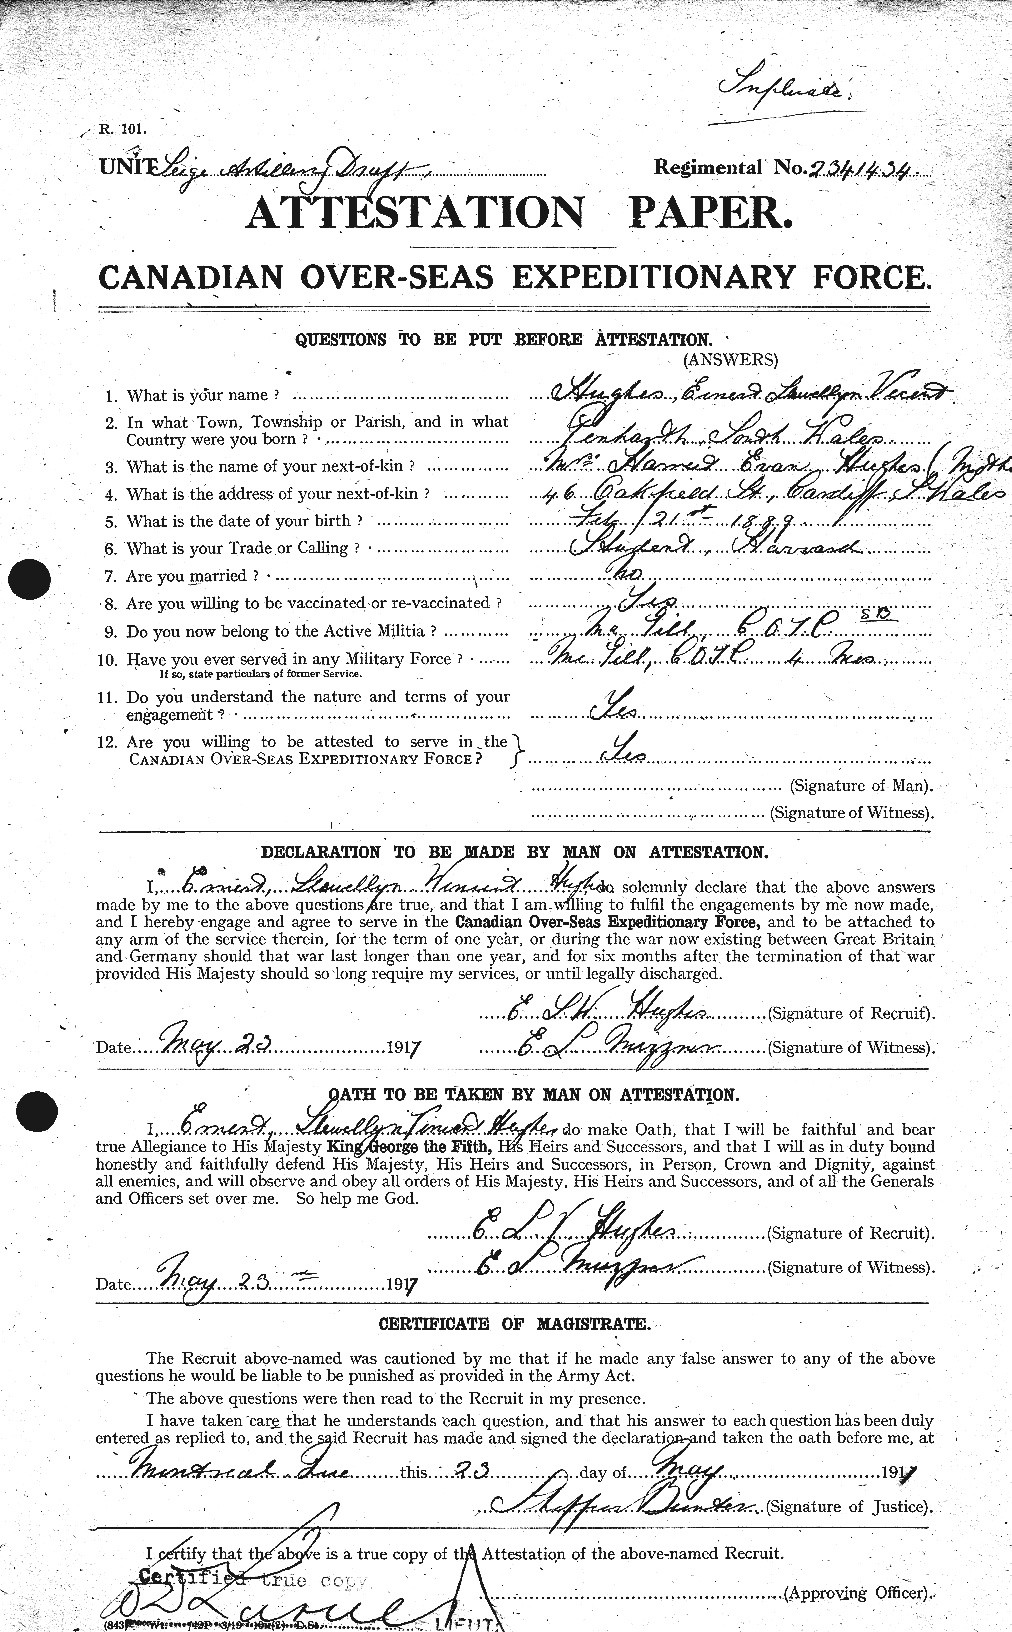 Personnel Records of the First World War - CEF 403754a